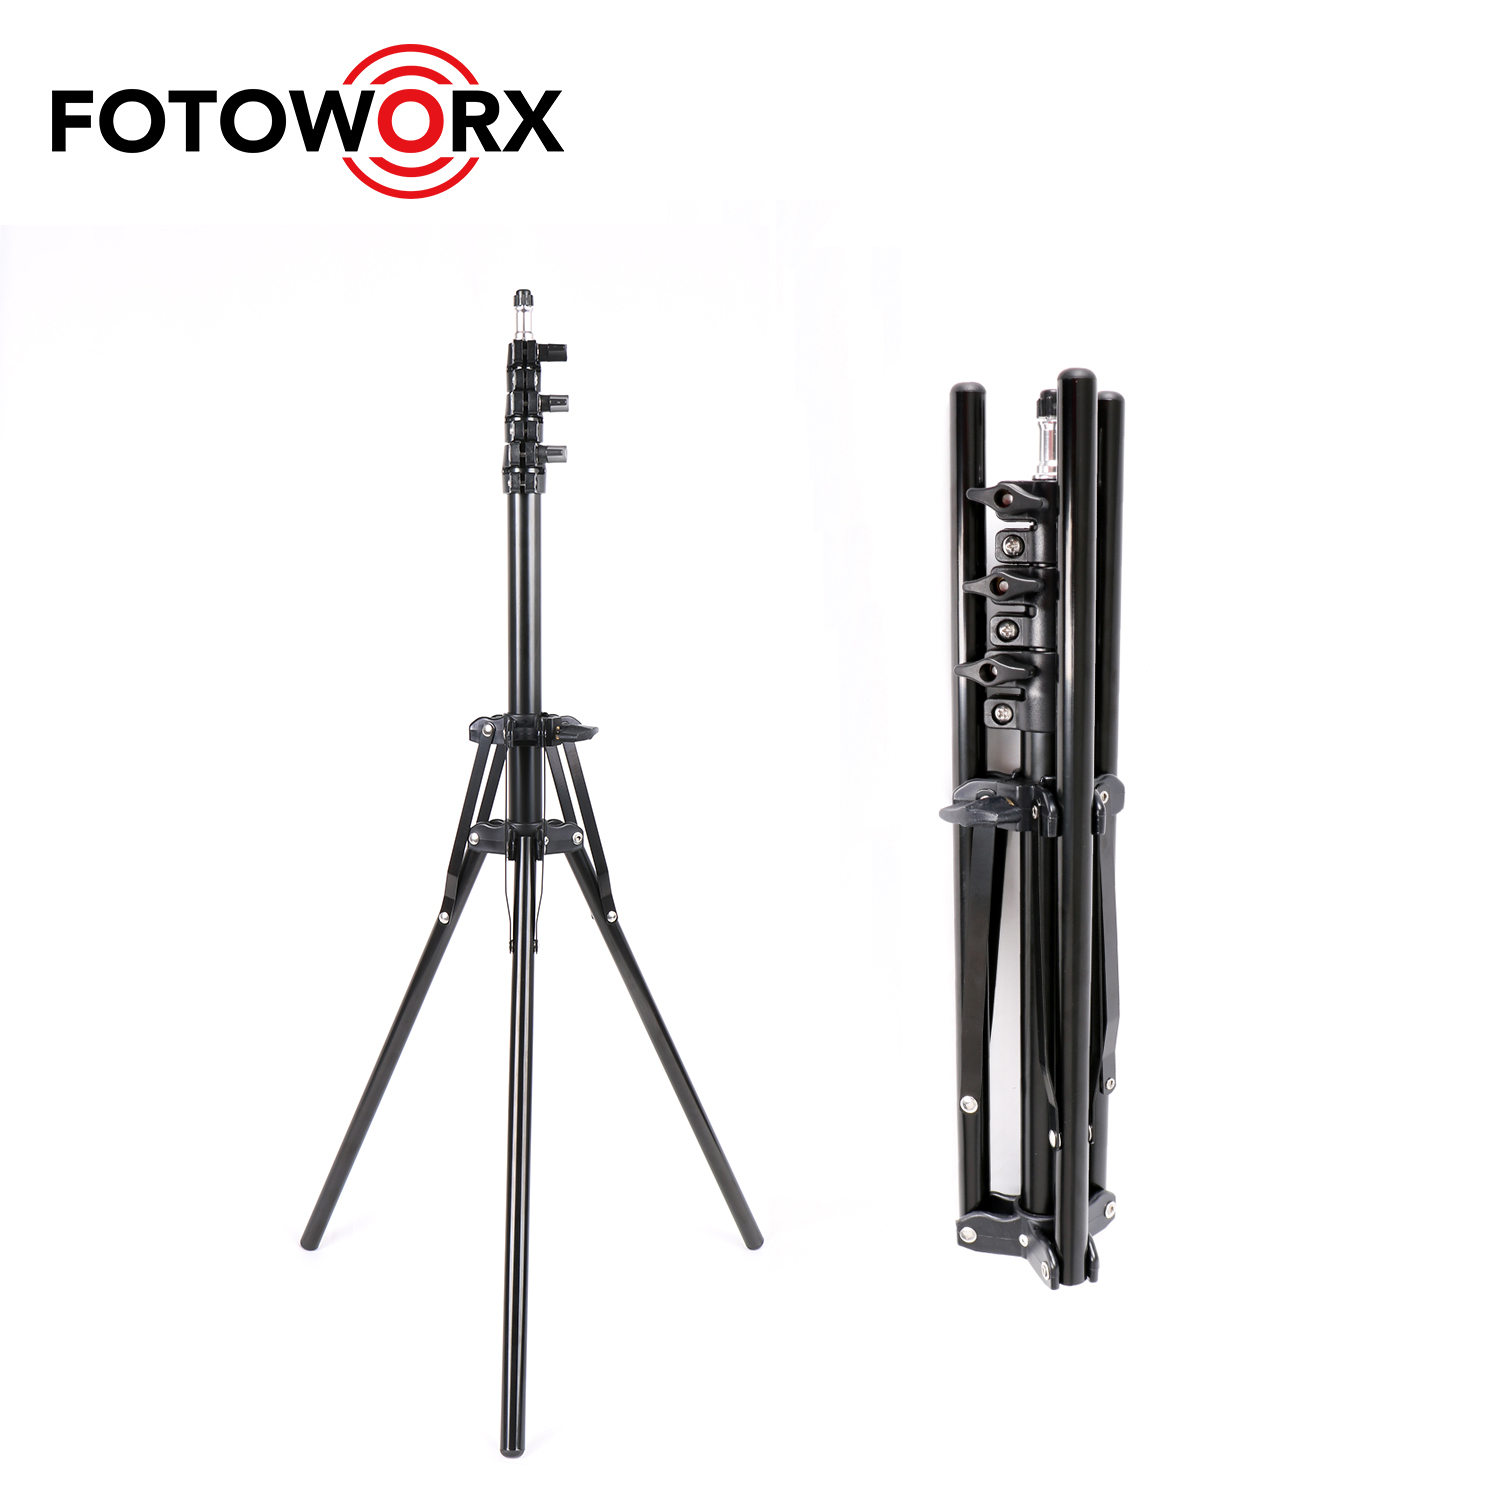 160cm Photography Studio Light Stand Stand with Folding Leg